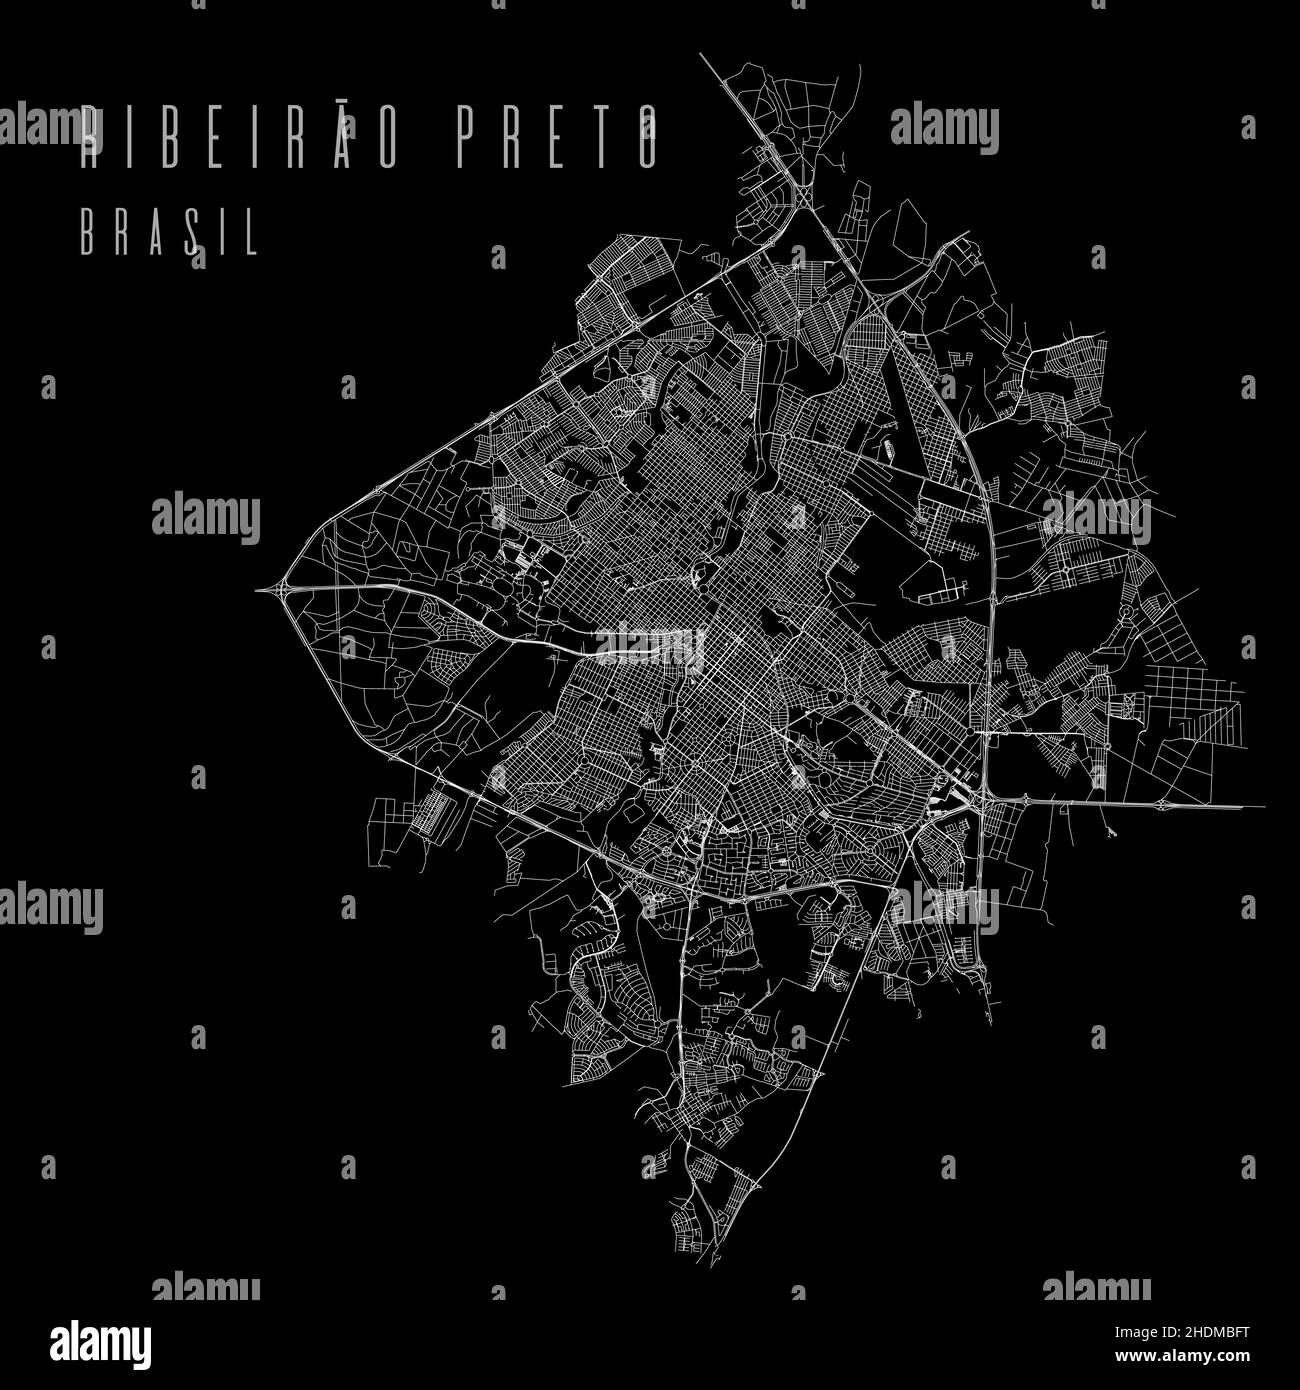 Ribeirao Preto city vector map poster. Brazil municipality square linear street map, administrative municipal area, white lines on black background, w Stock Vector